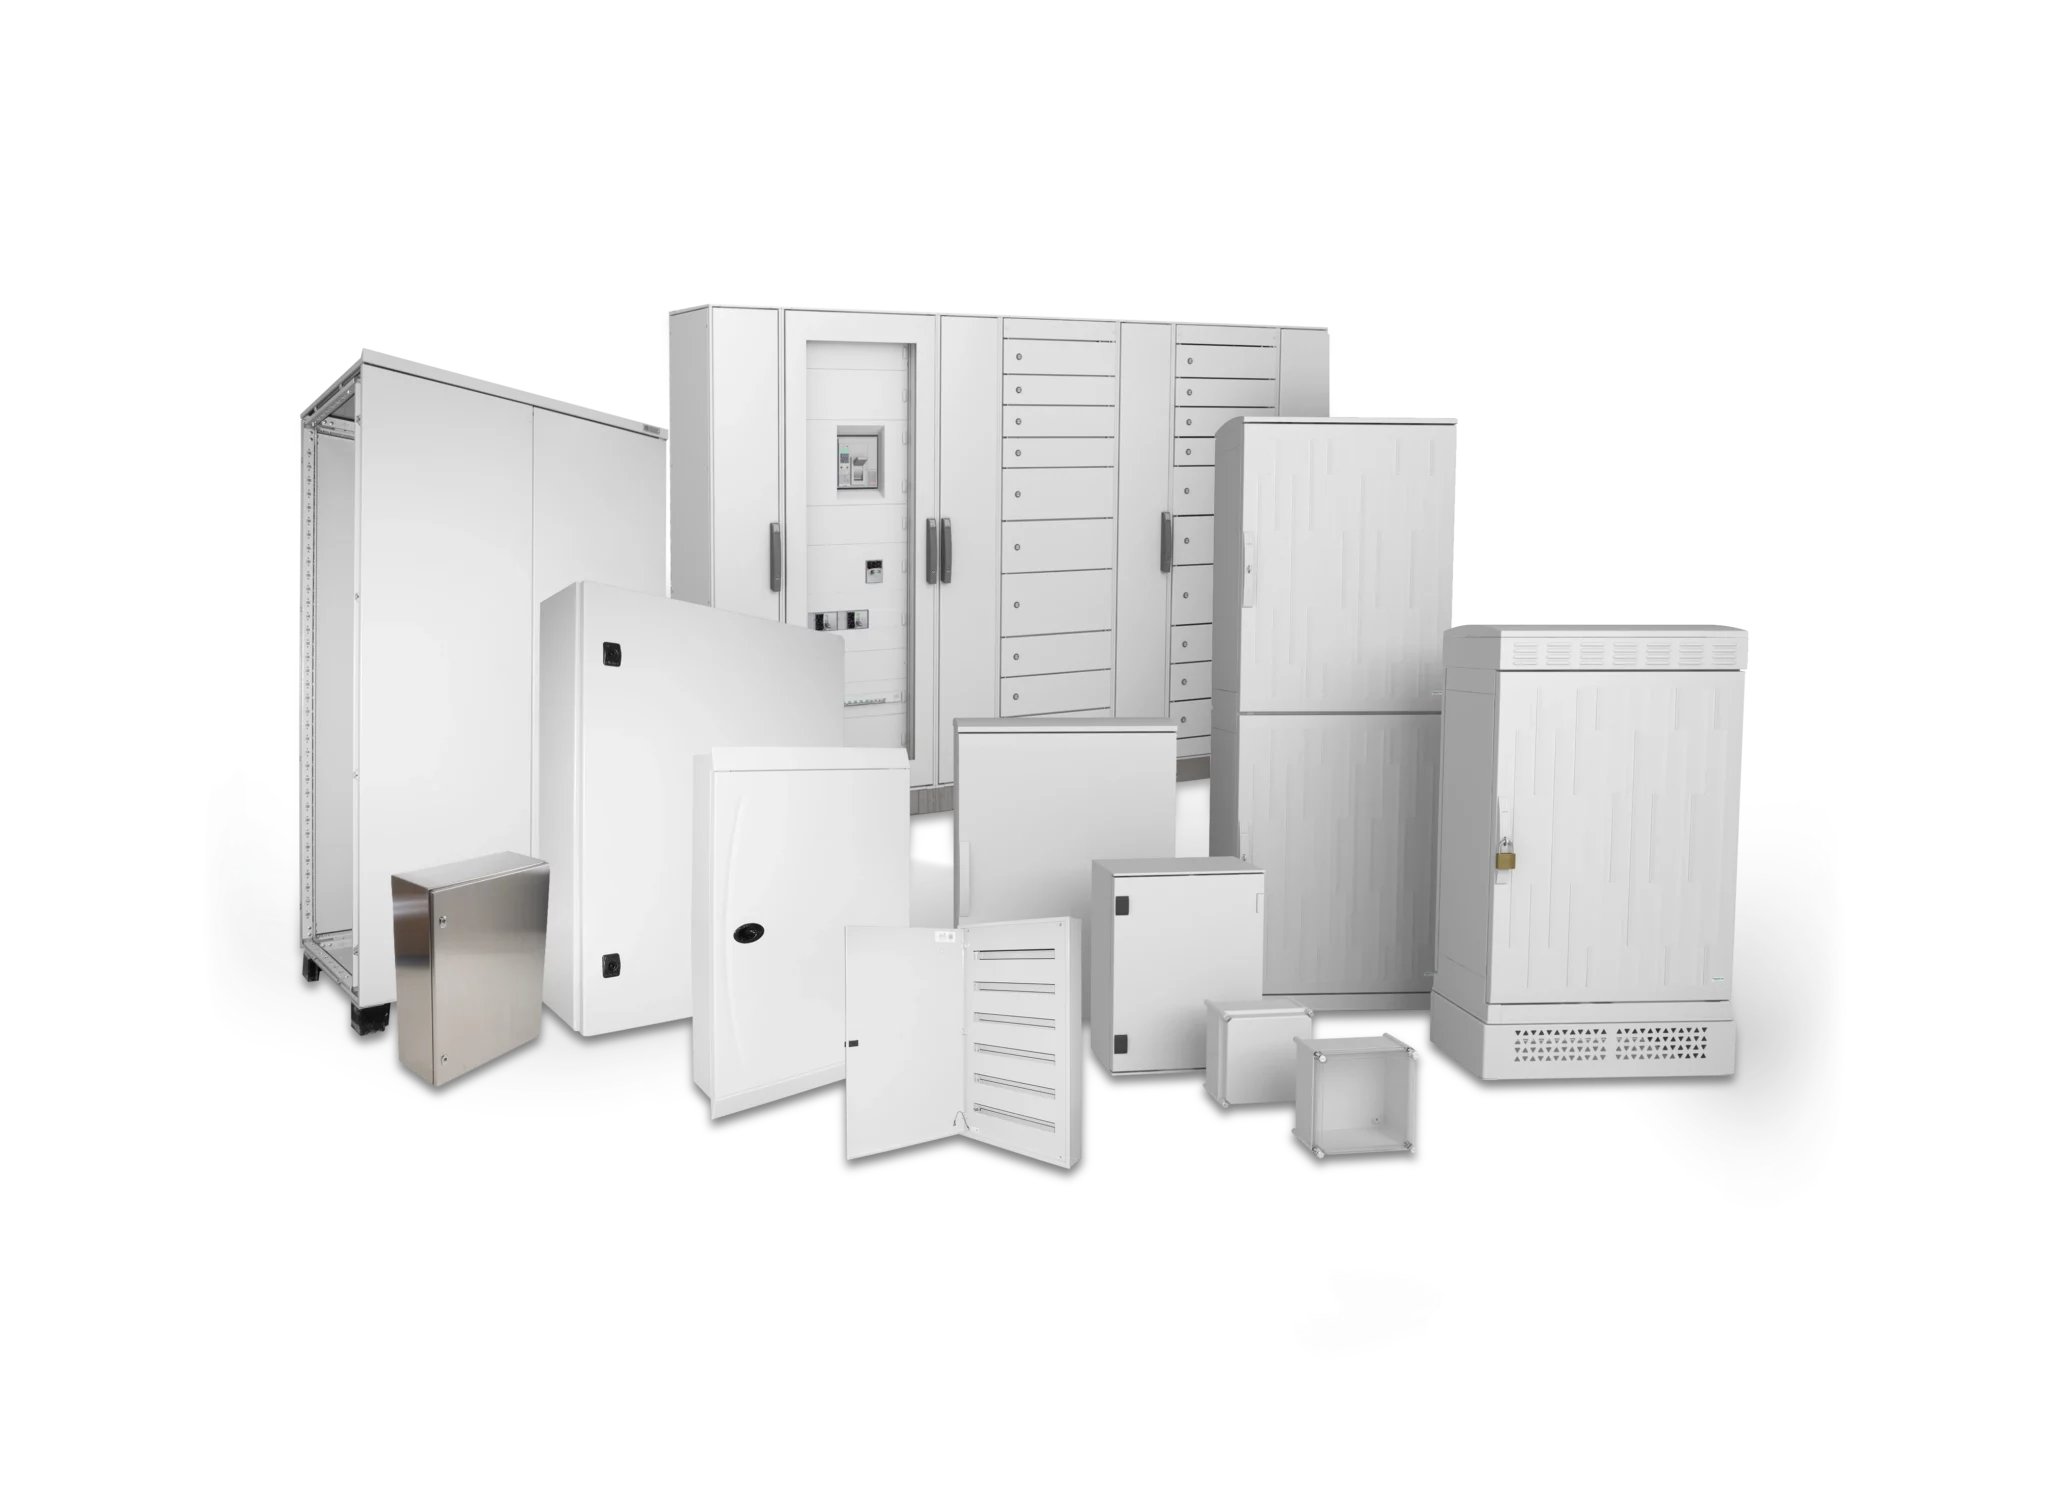 Switchboards, cabinets and enclosures